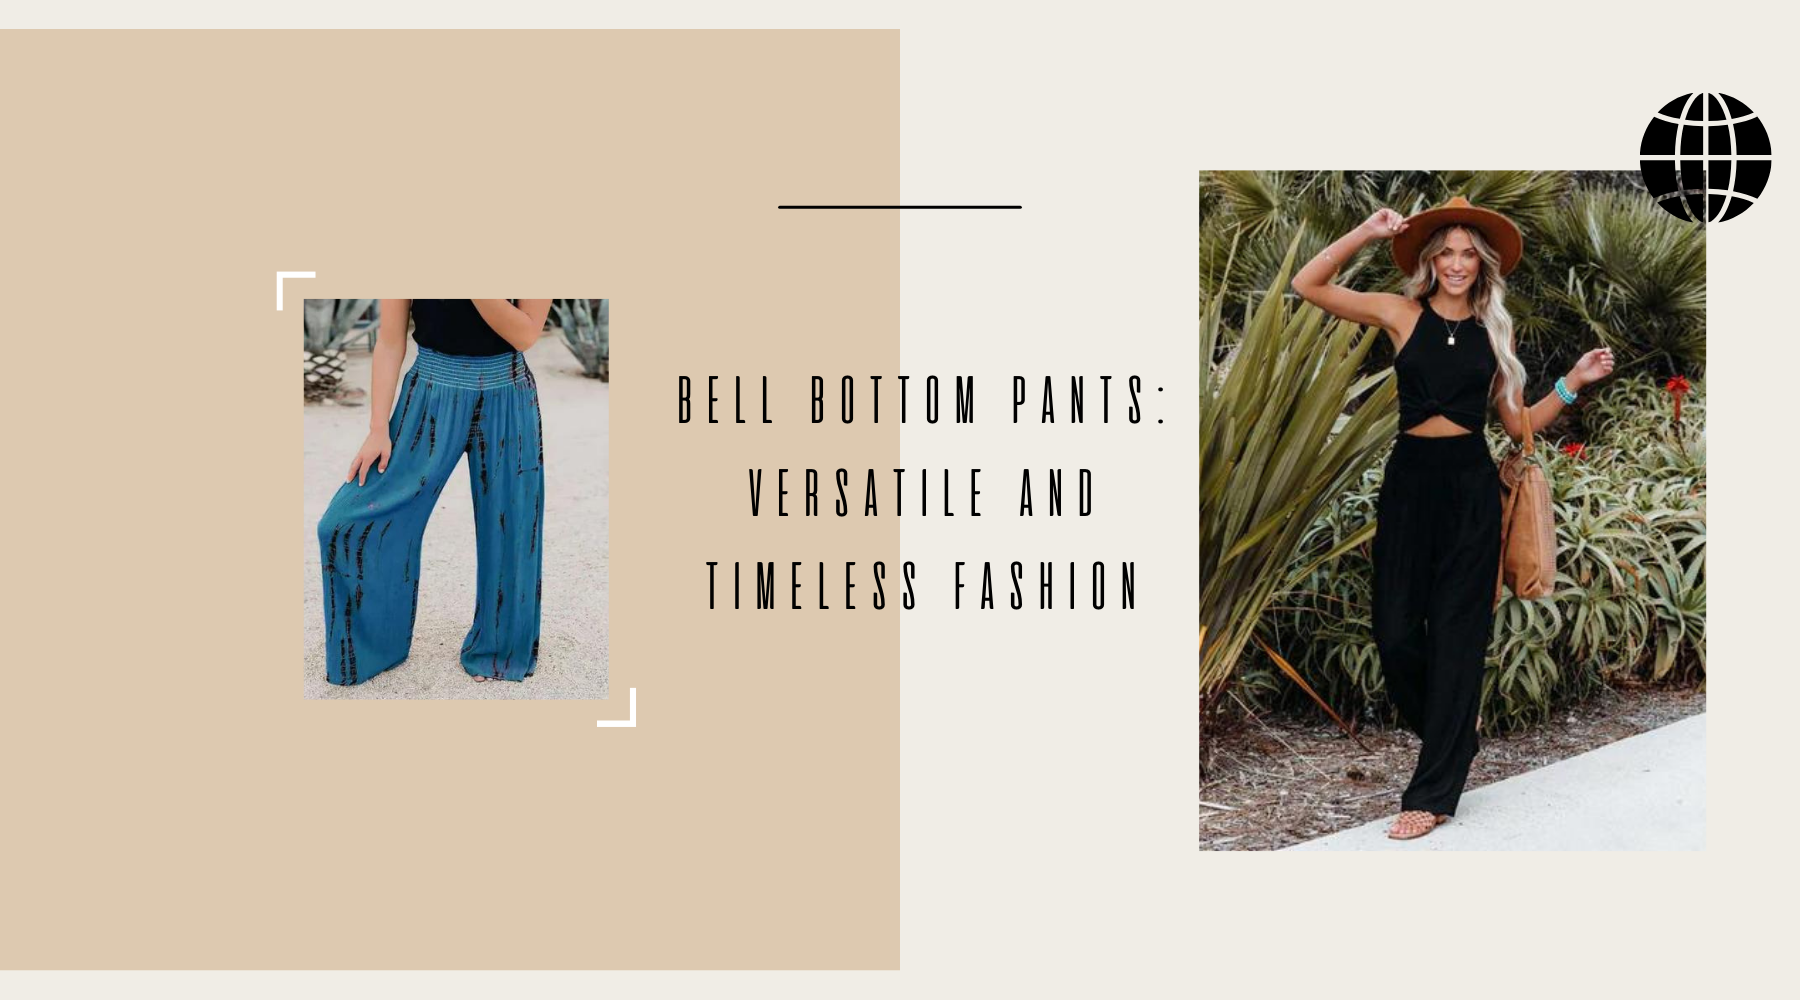 Bell Bottom Pants: Versatile and Timeless Fashion